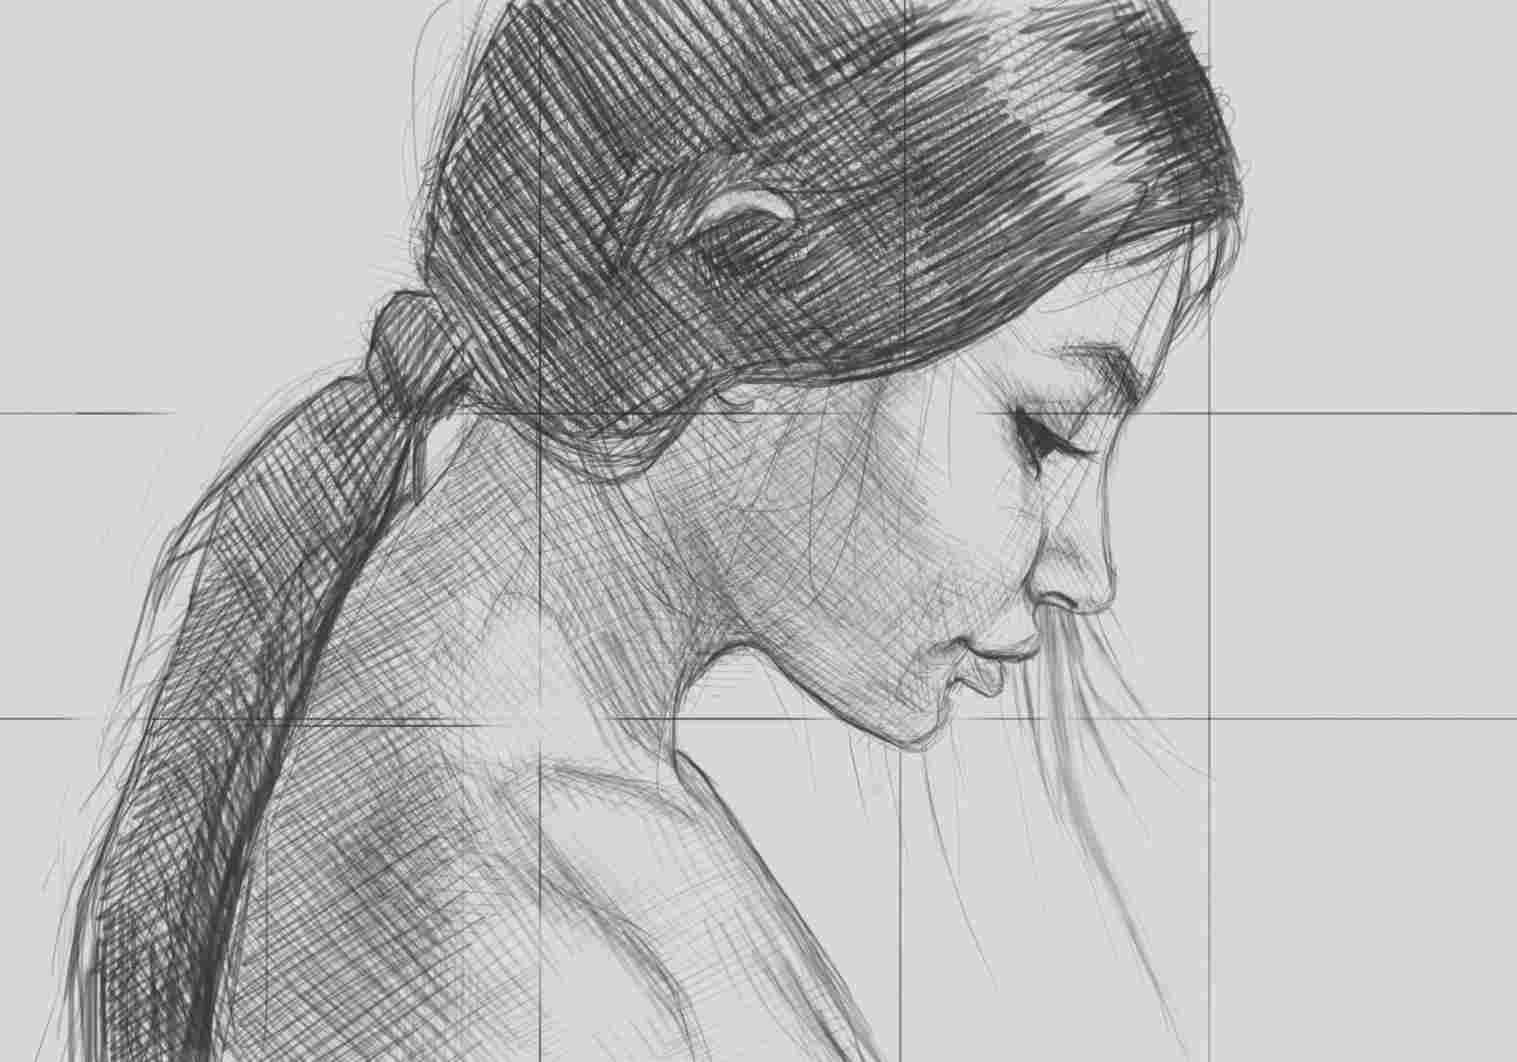 Great How To Draw Female Profile of the decade Check it out now 